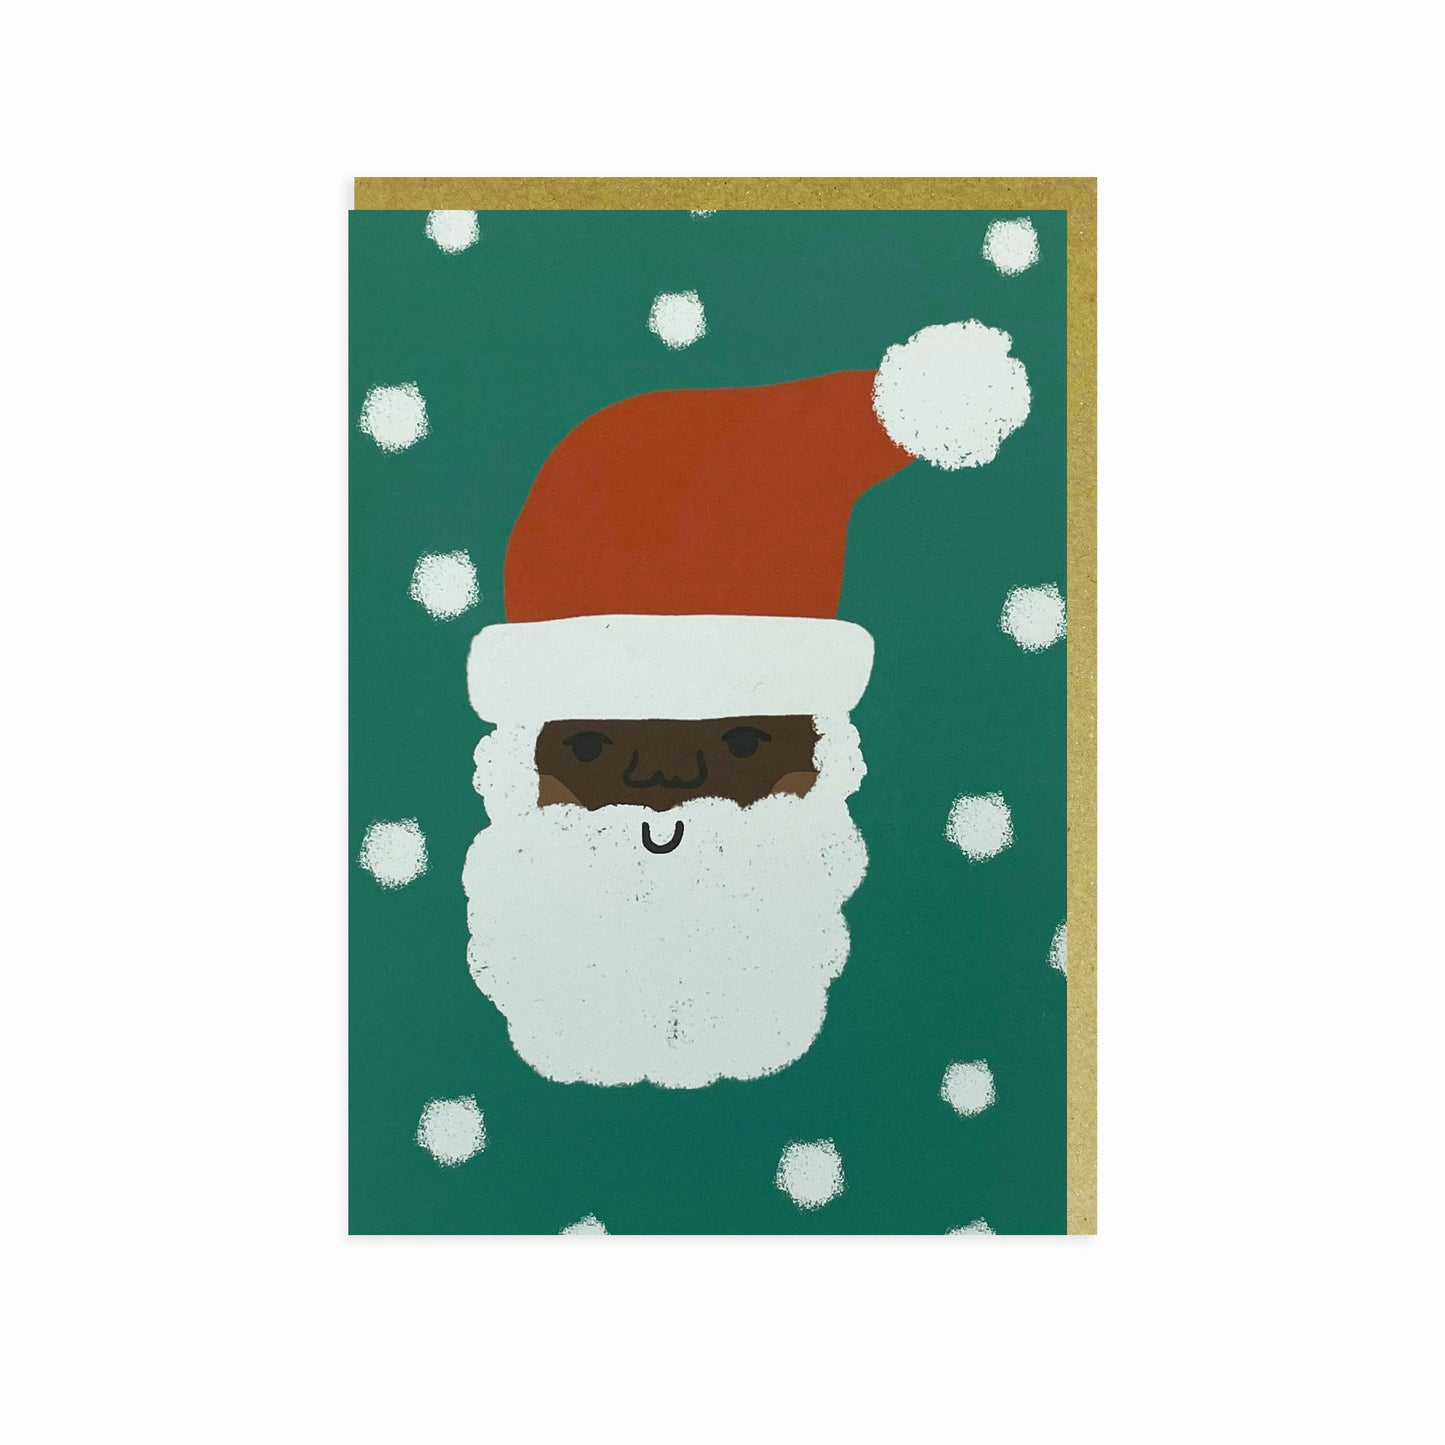 Black Santa Claus with snowflakes in the background. Black Christmas card.